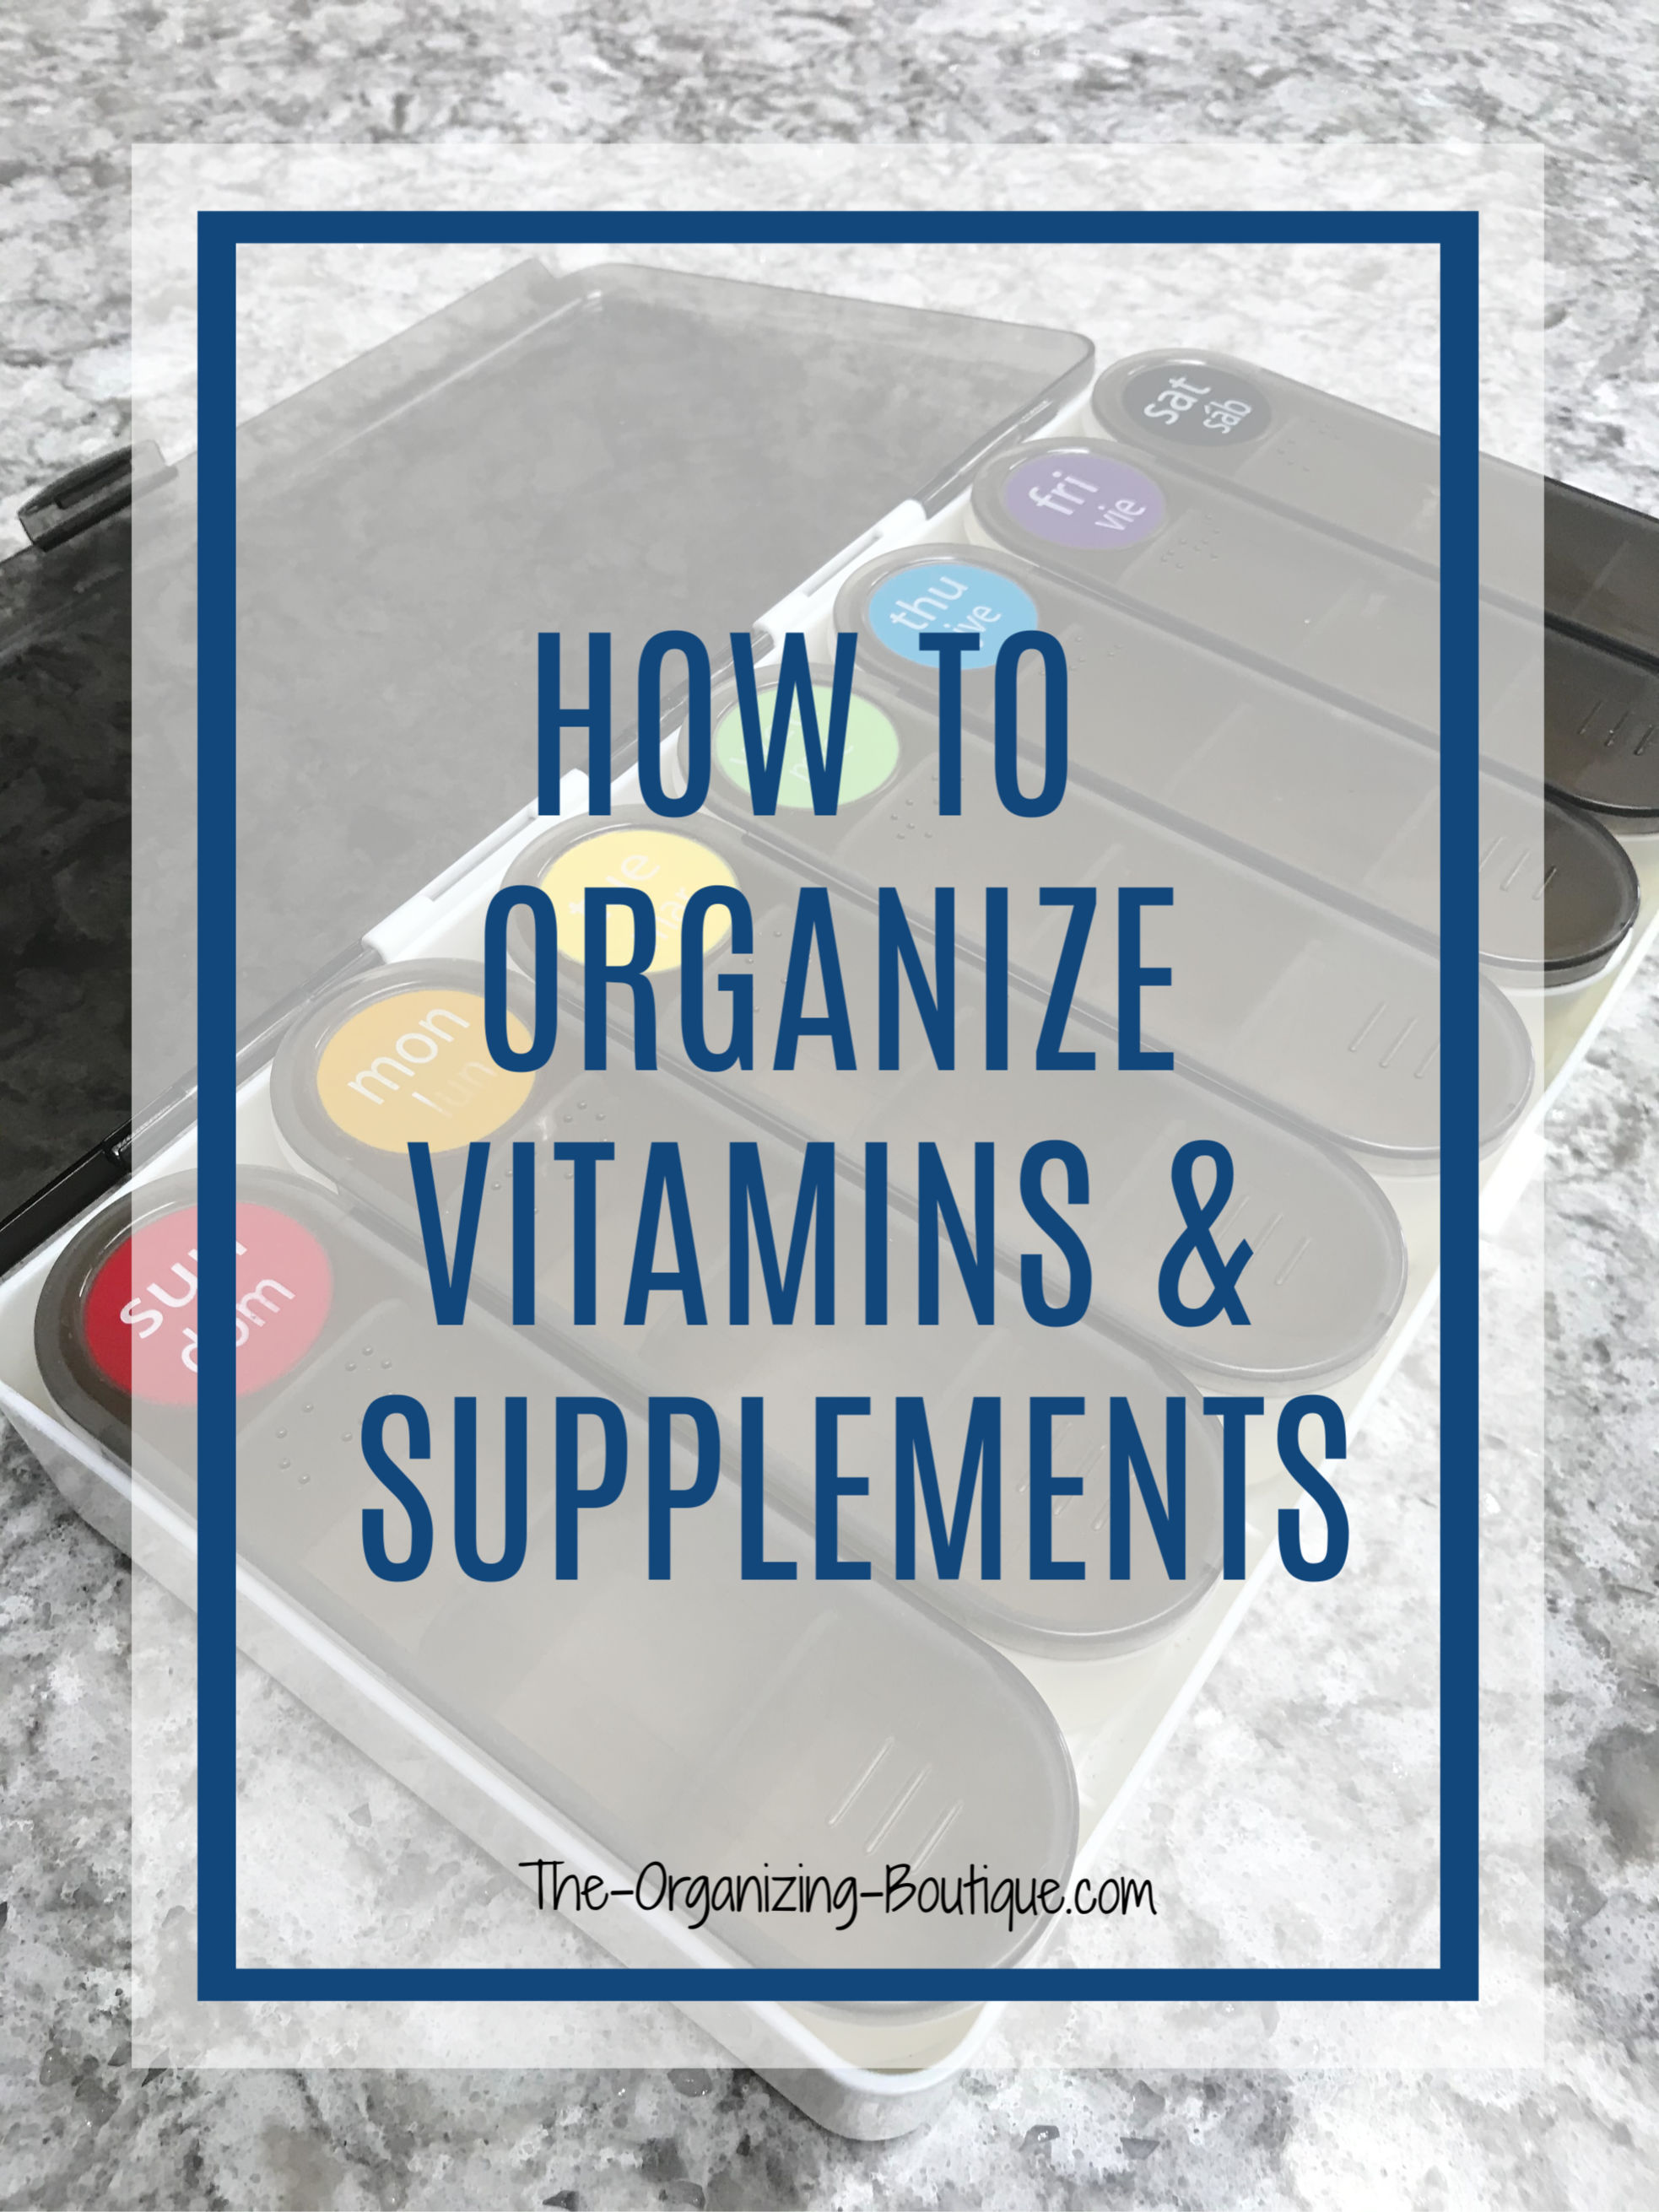 Take multiple vitamins a day? Maybe you need a pill container or organizer. Here's exactly how to get organized so you can remember to take your pills.